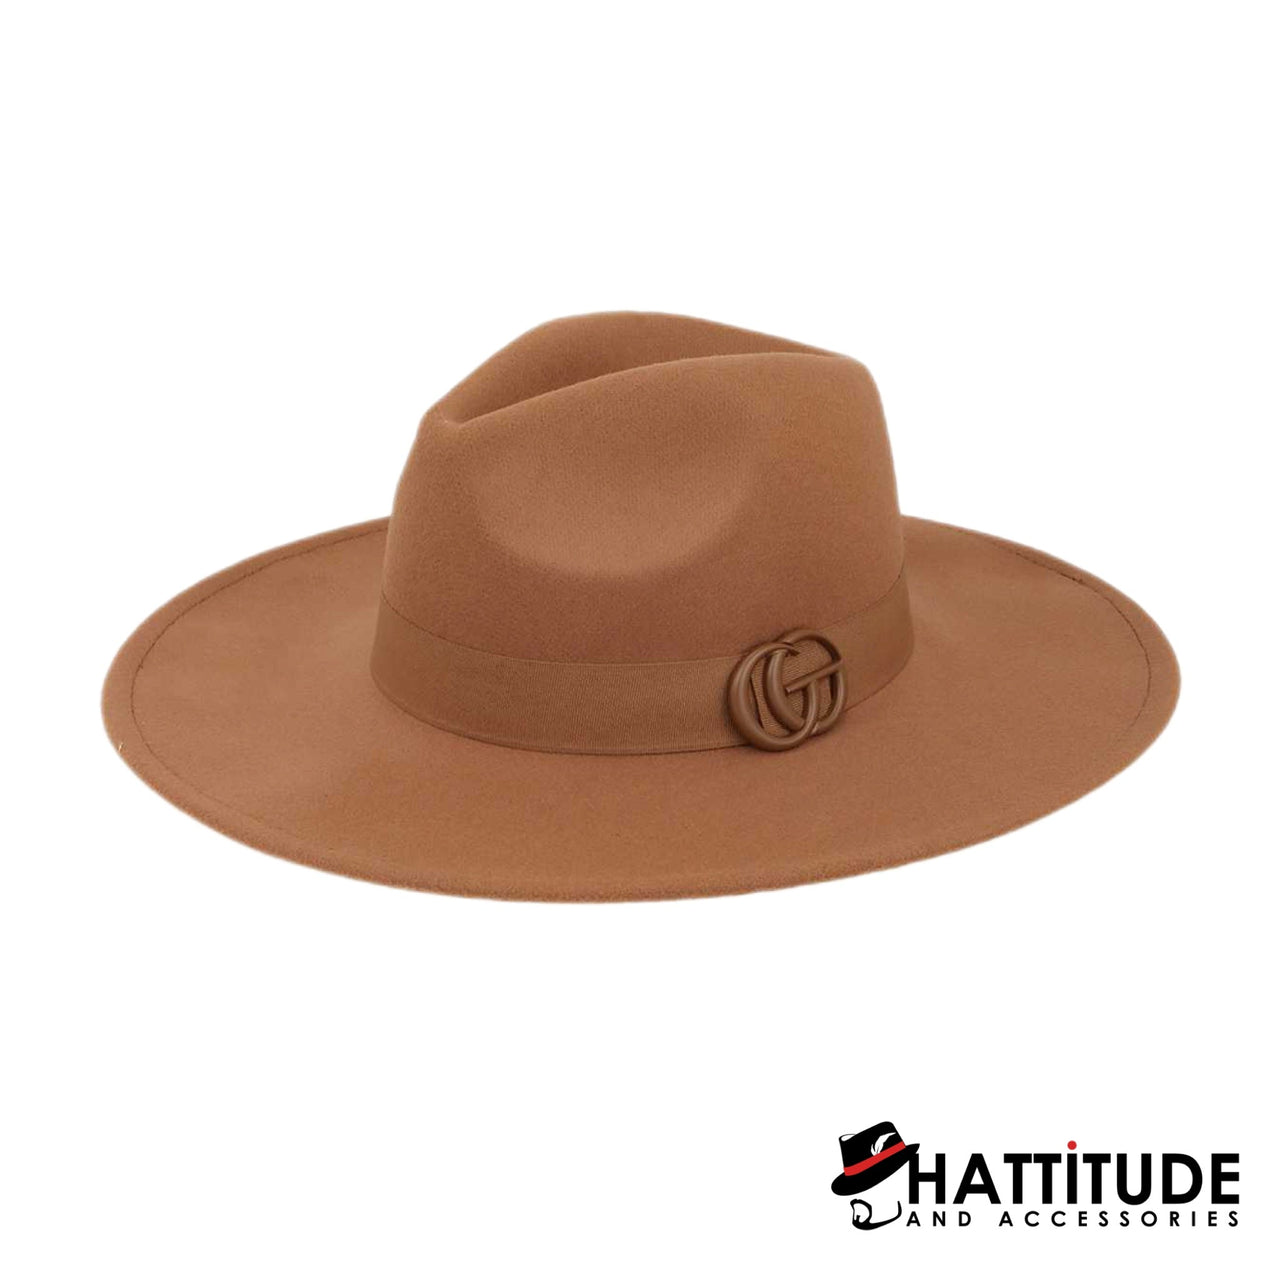 GC 'Limited Collection' - Brown - Hattitude